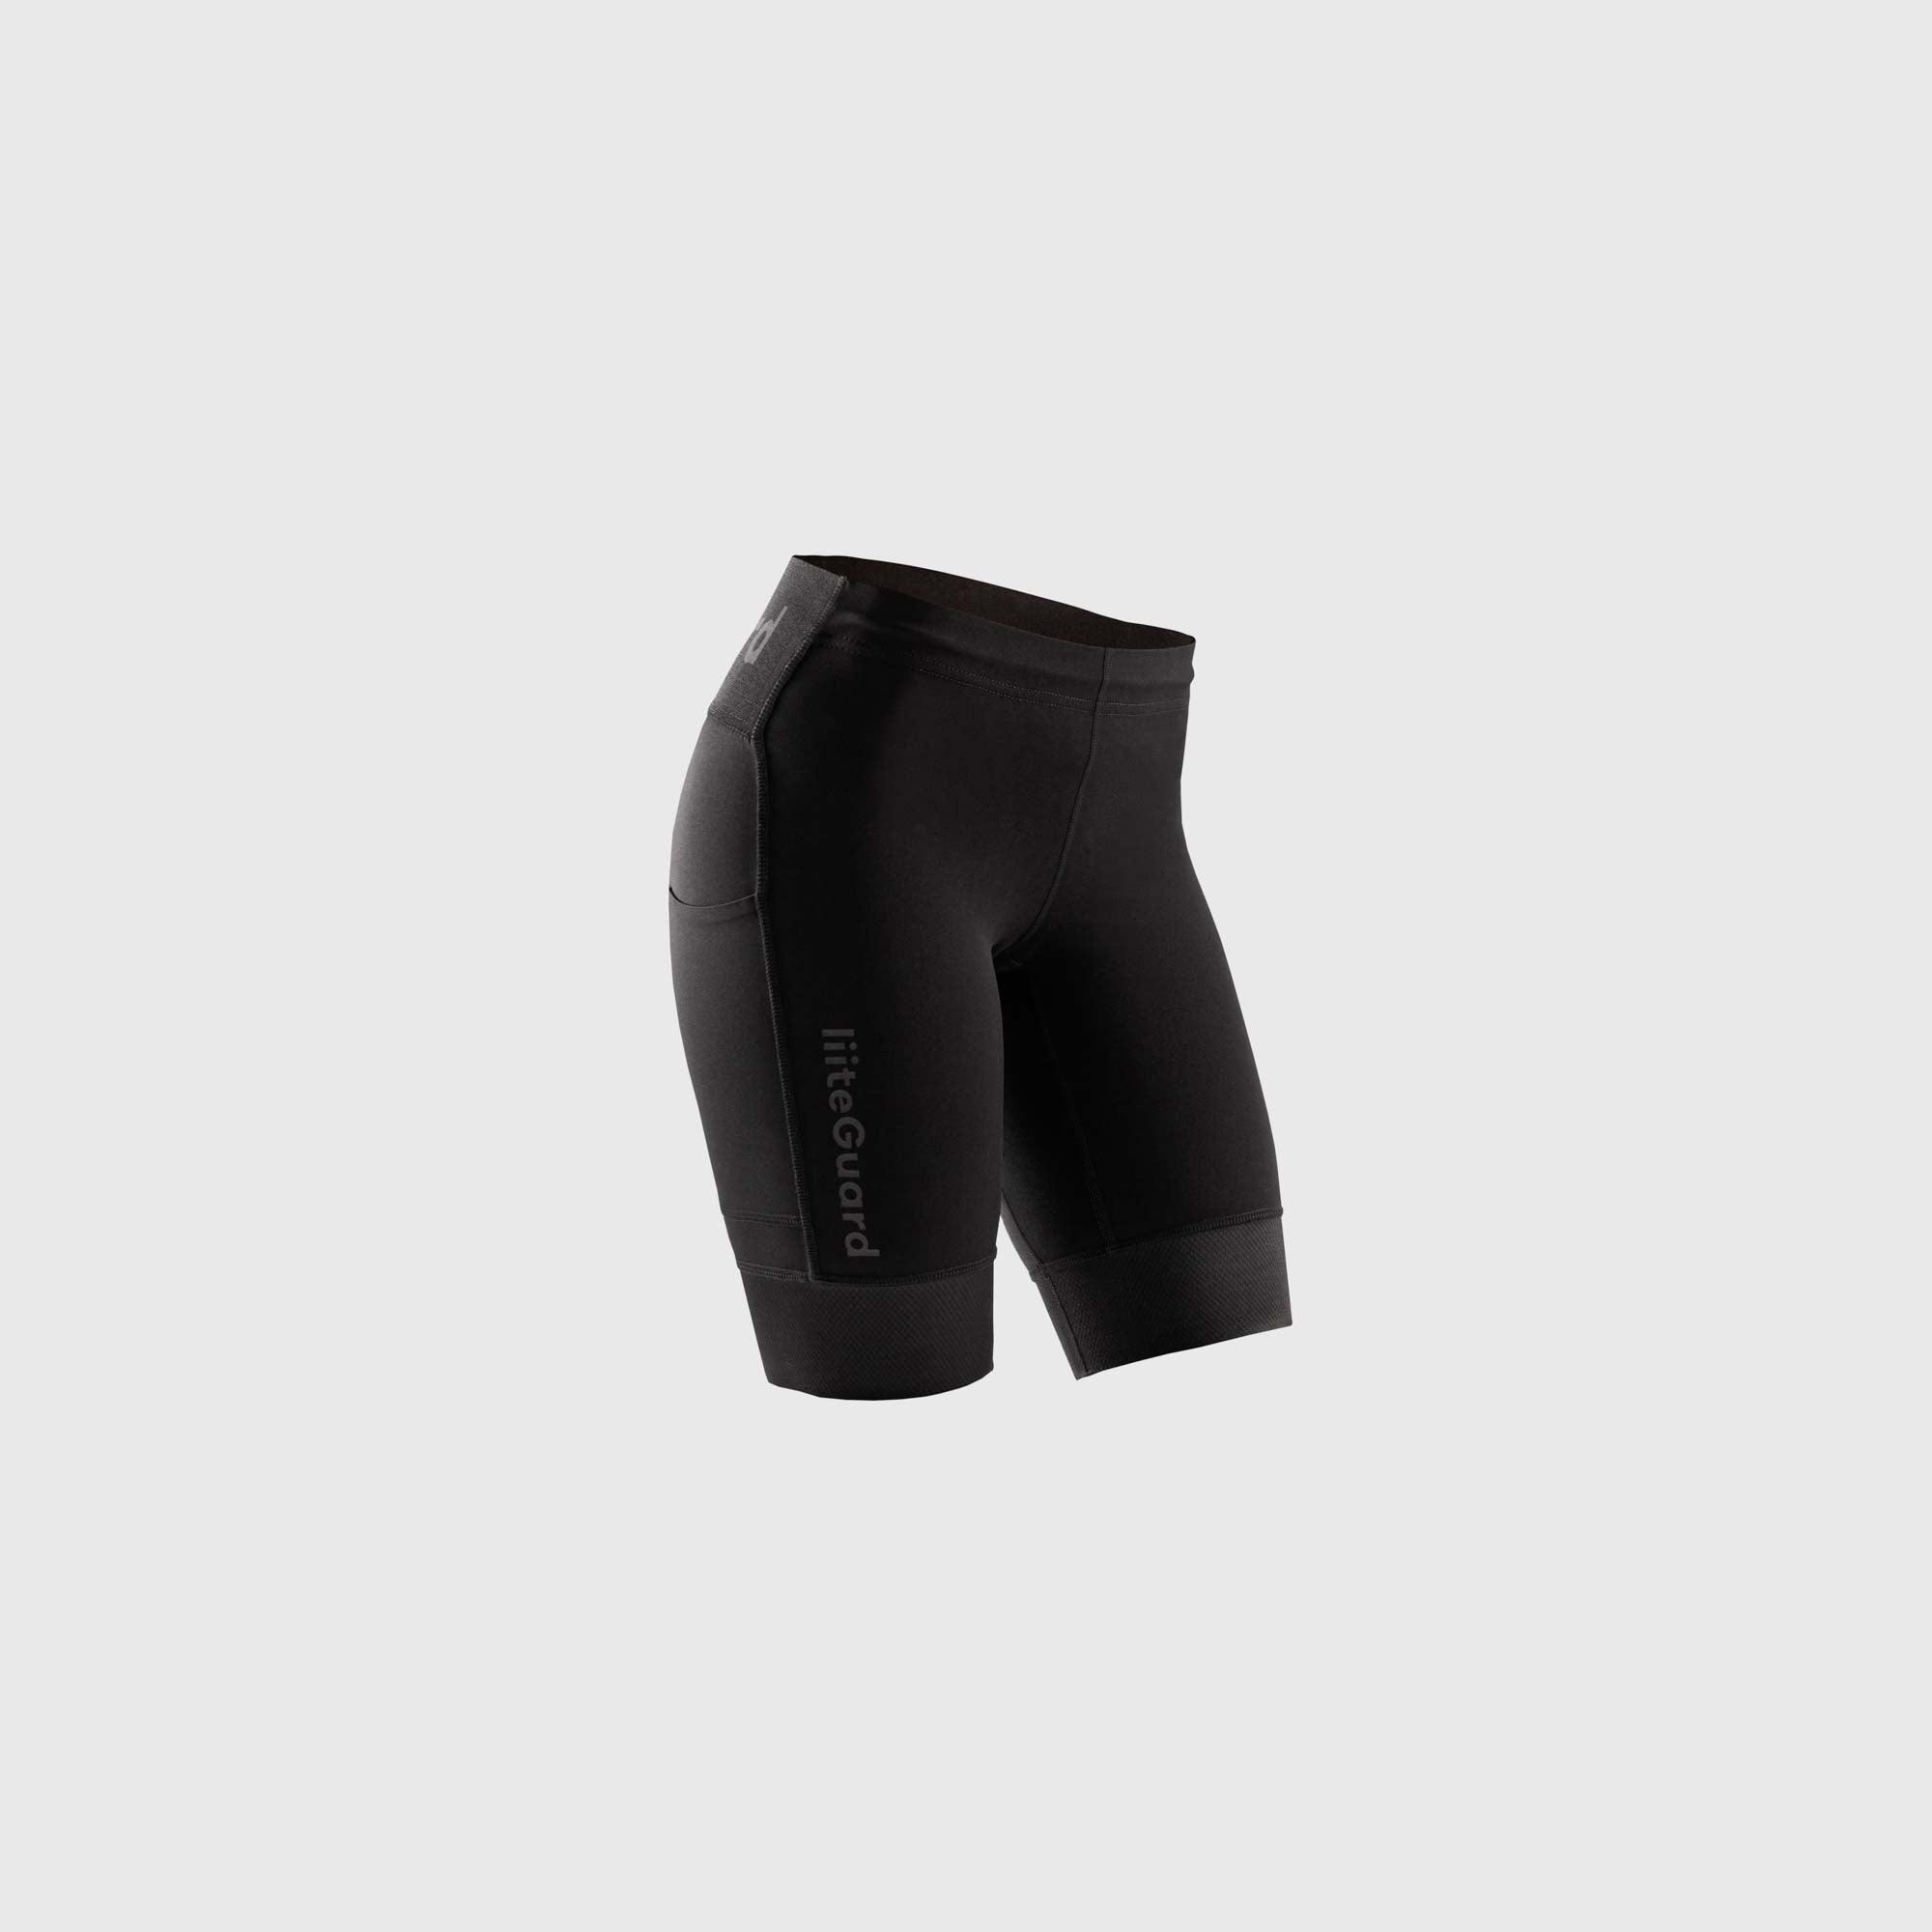 Compression tights for women